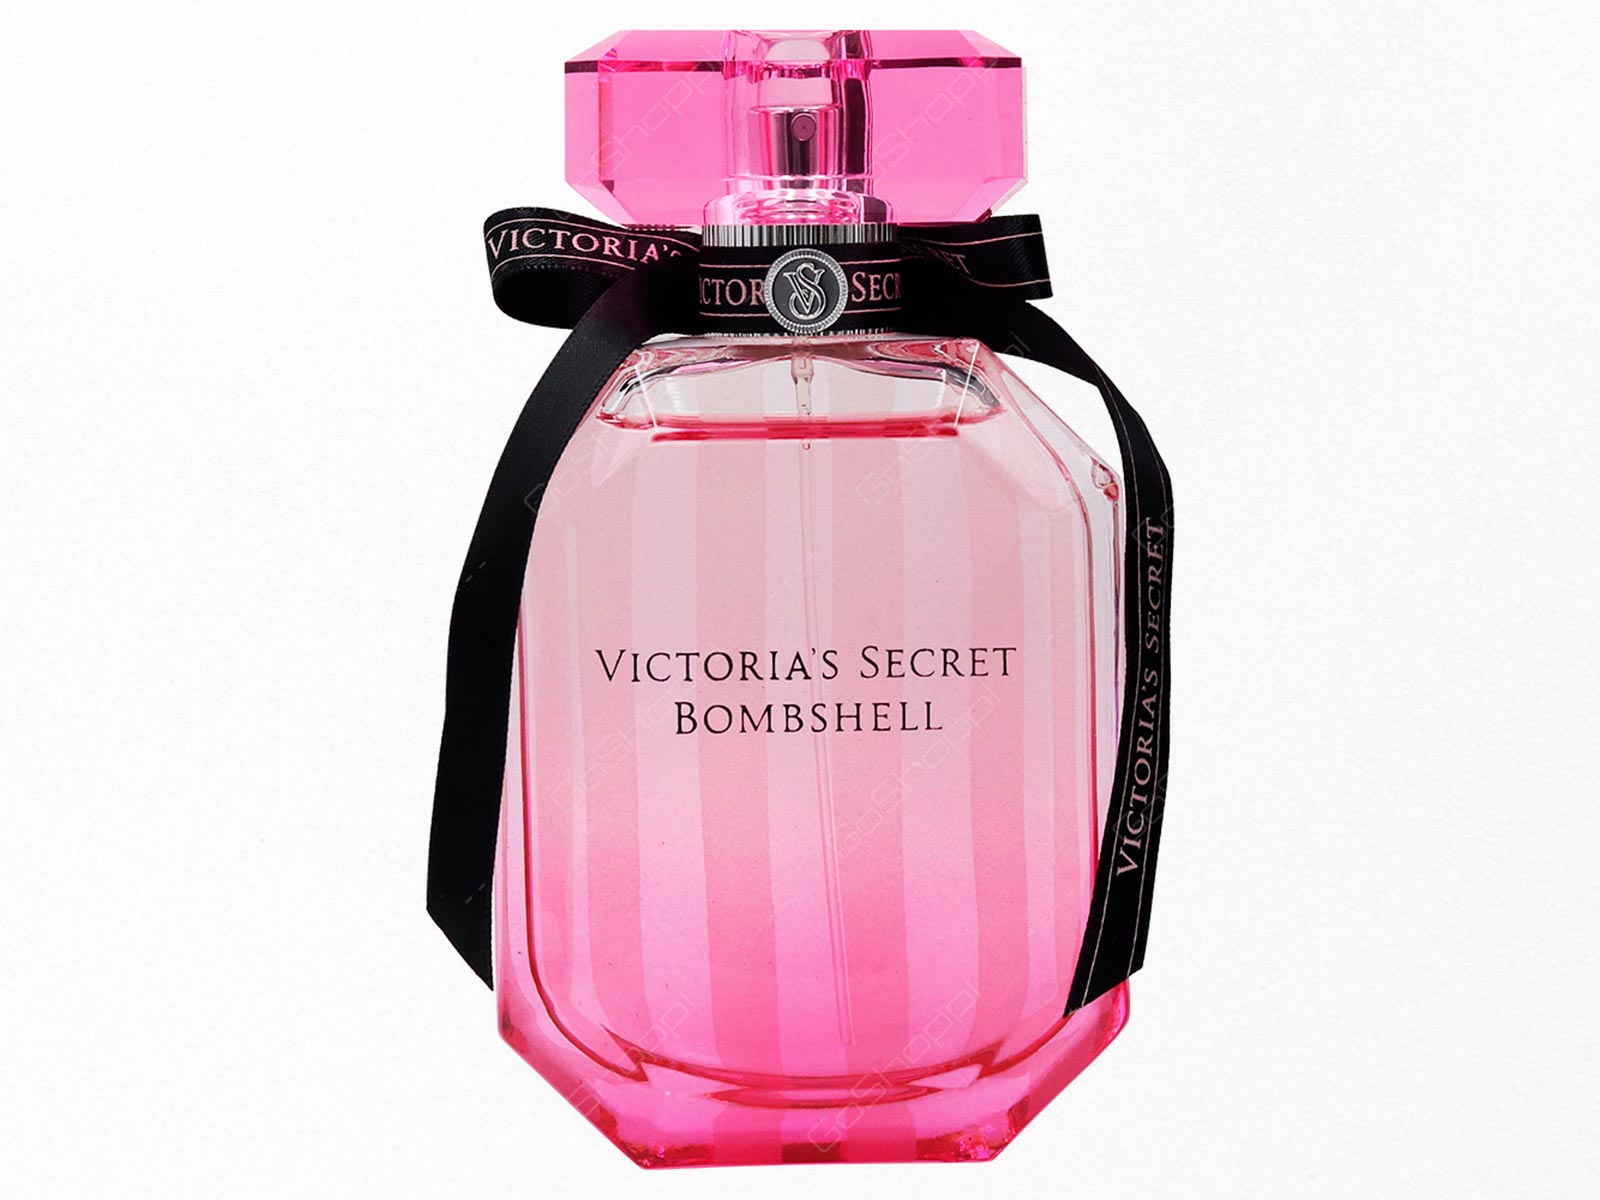 This Victoria’s Secret perfume repels insects